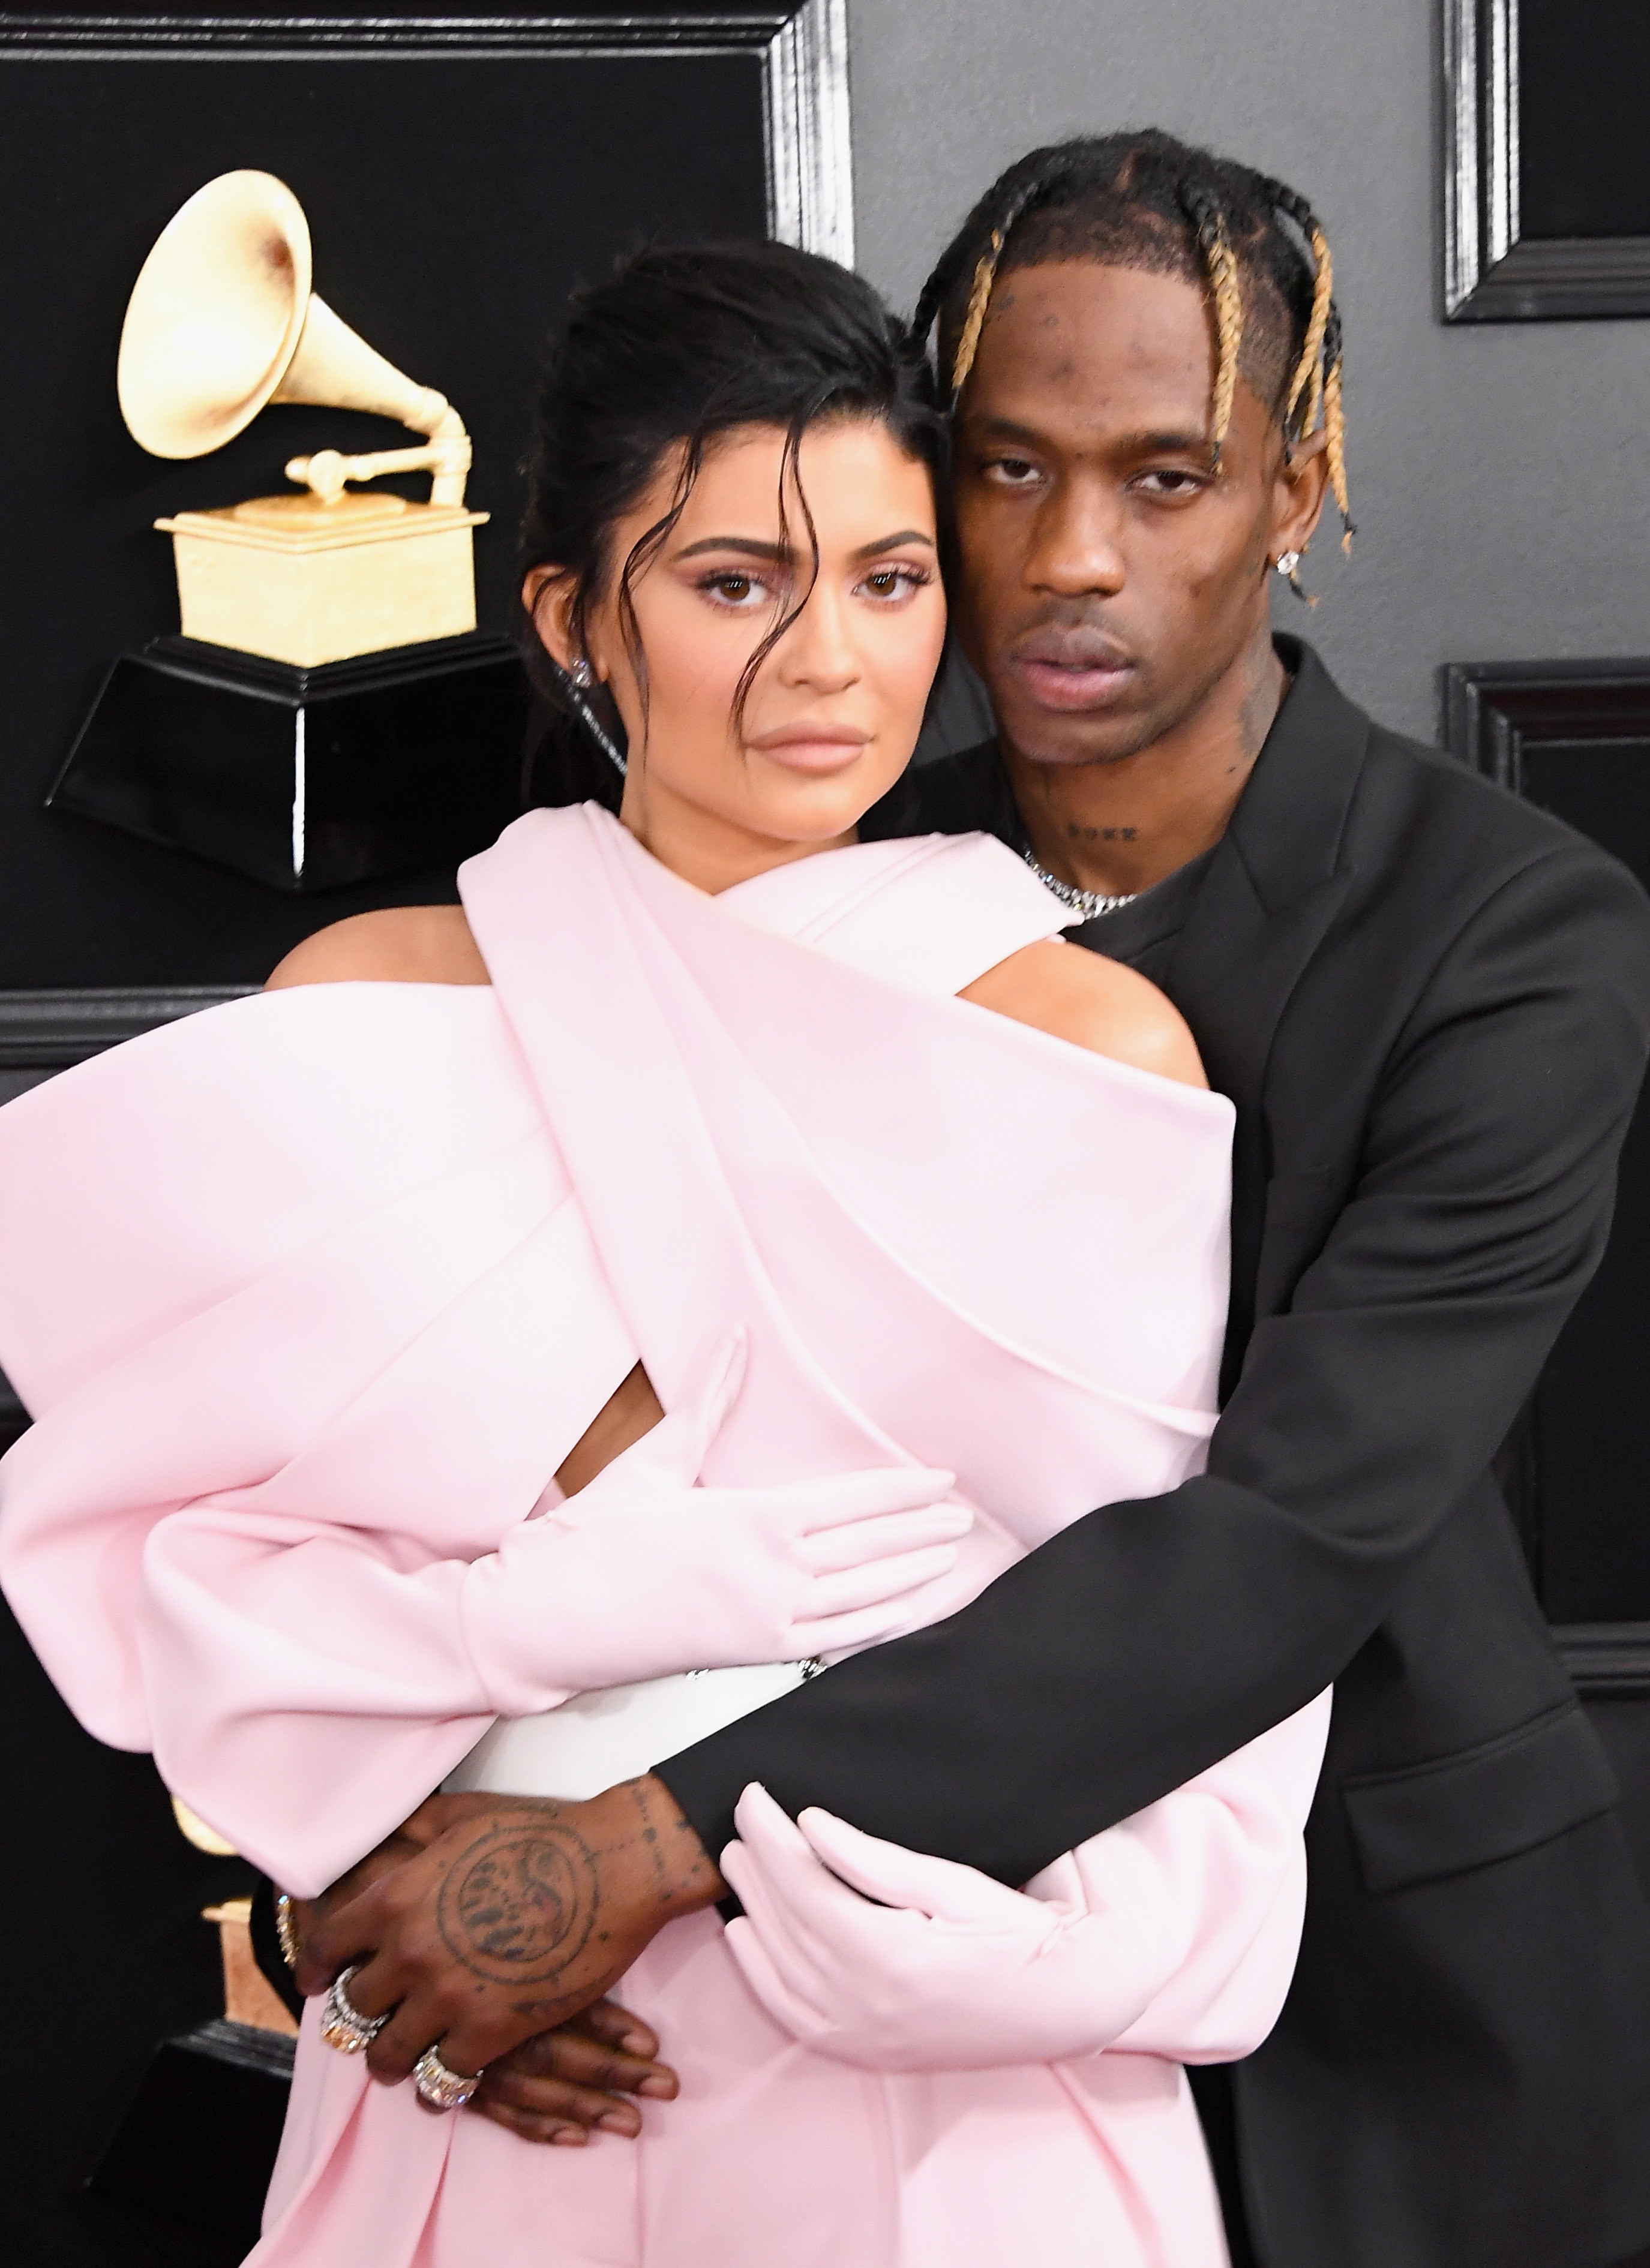 Travis embraces Kylie on the red carpet